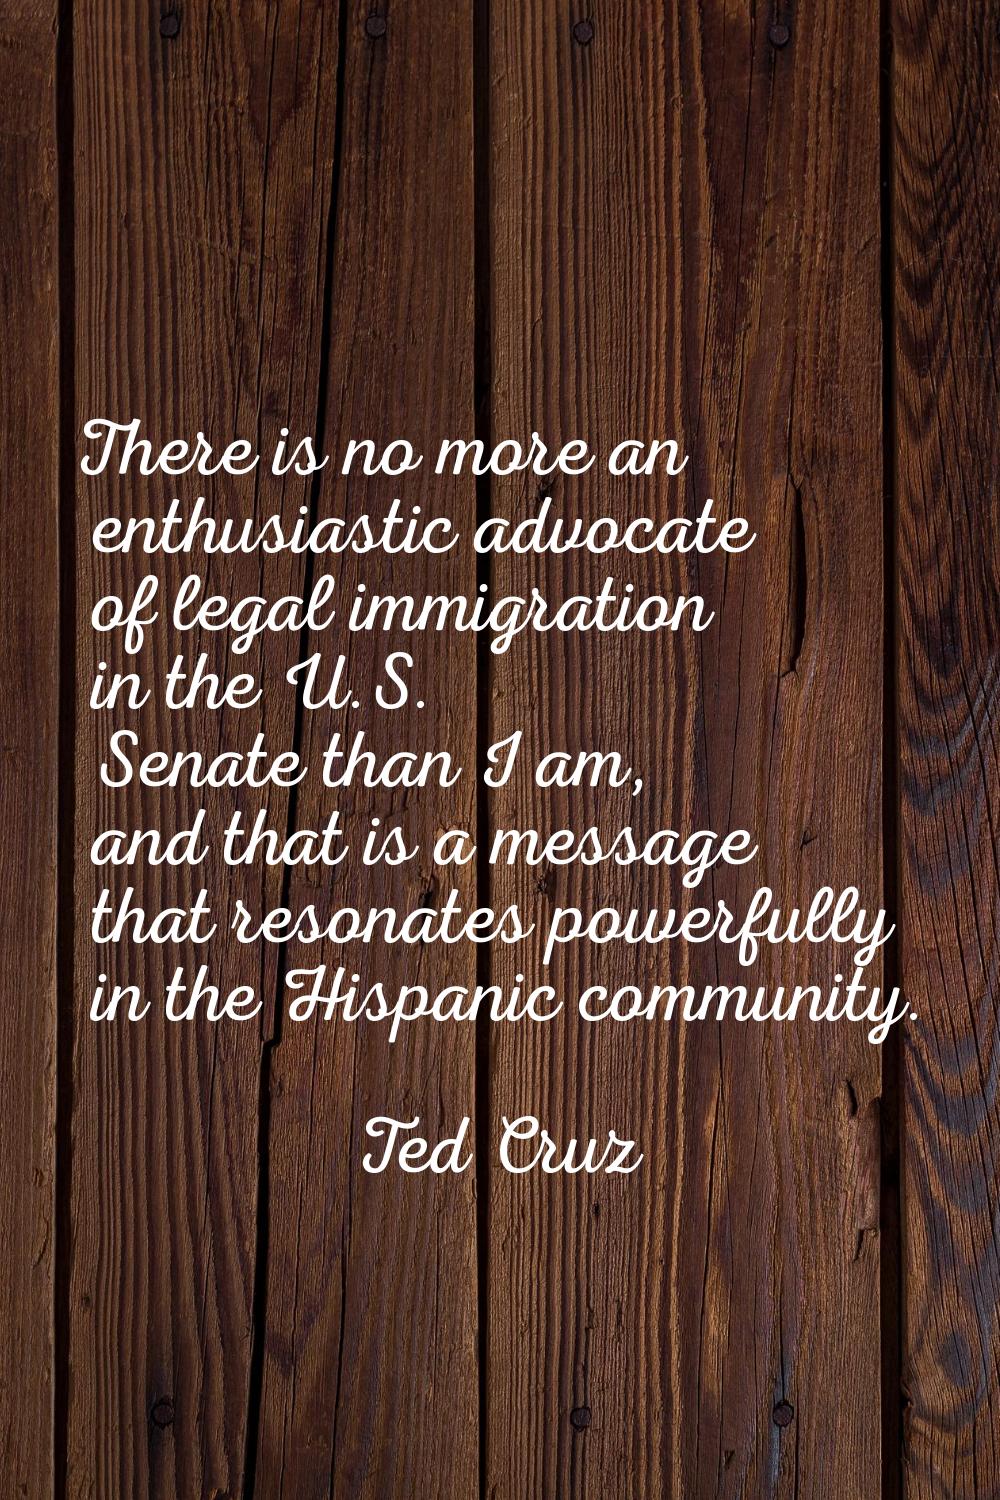 There is no more an enthusiastic advocate of legal immigration in the U.S. Senate than I am, and th